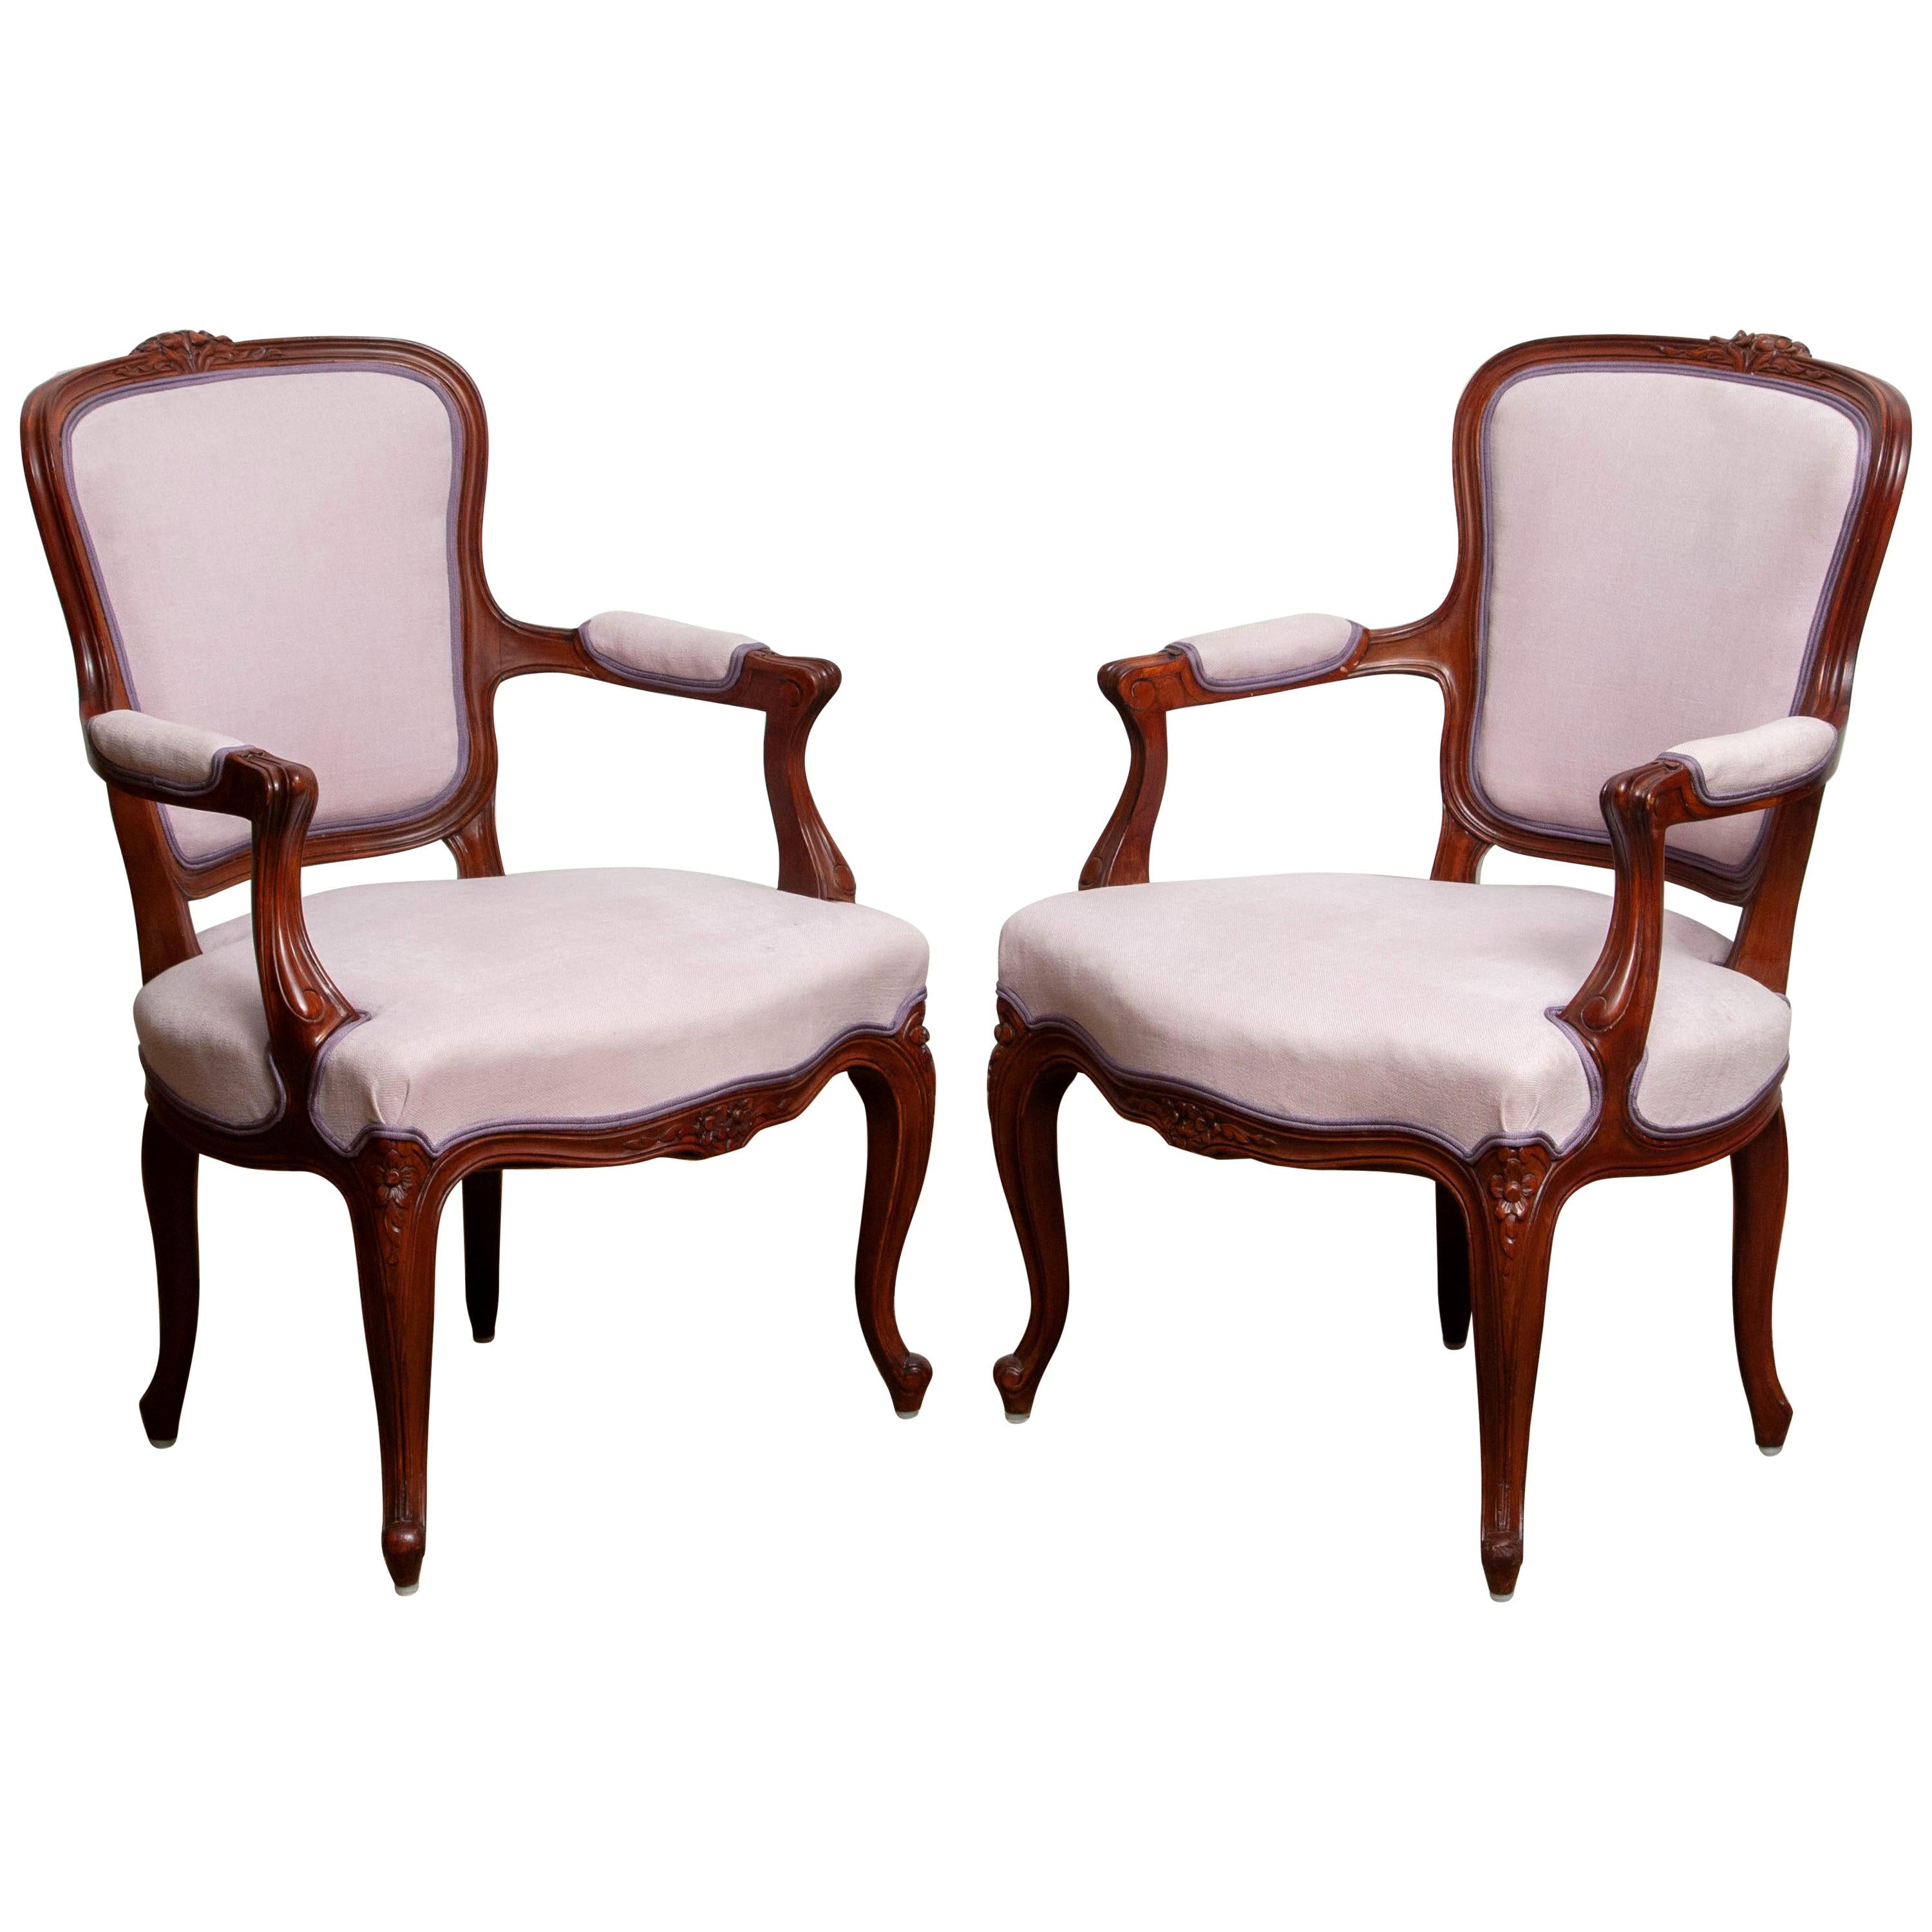 1950s, the Swedish Neo-Rococo, and finished in the shabby chic technique armchair is in perfect condition. Upholstered in pink fabric and two extra cushions for extra comfort also in pink jacquard. Measures: Seat height with the extra cushion is: